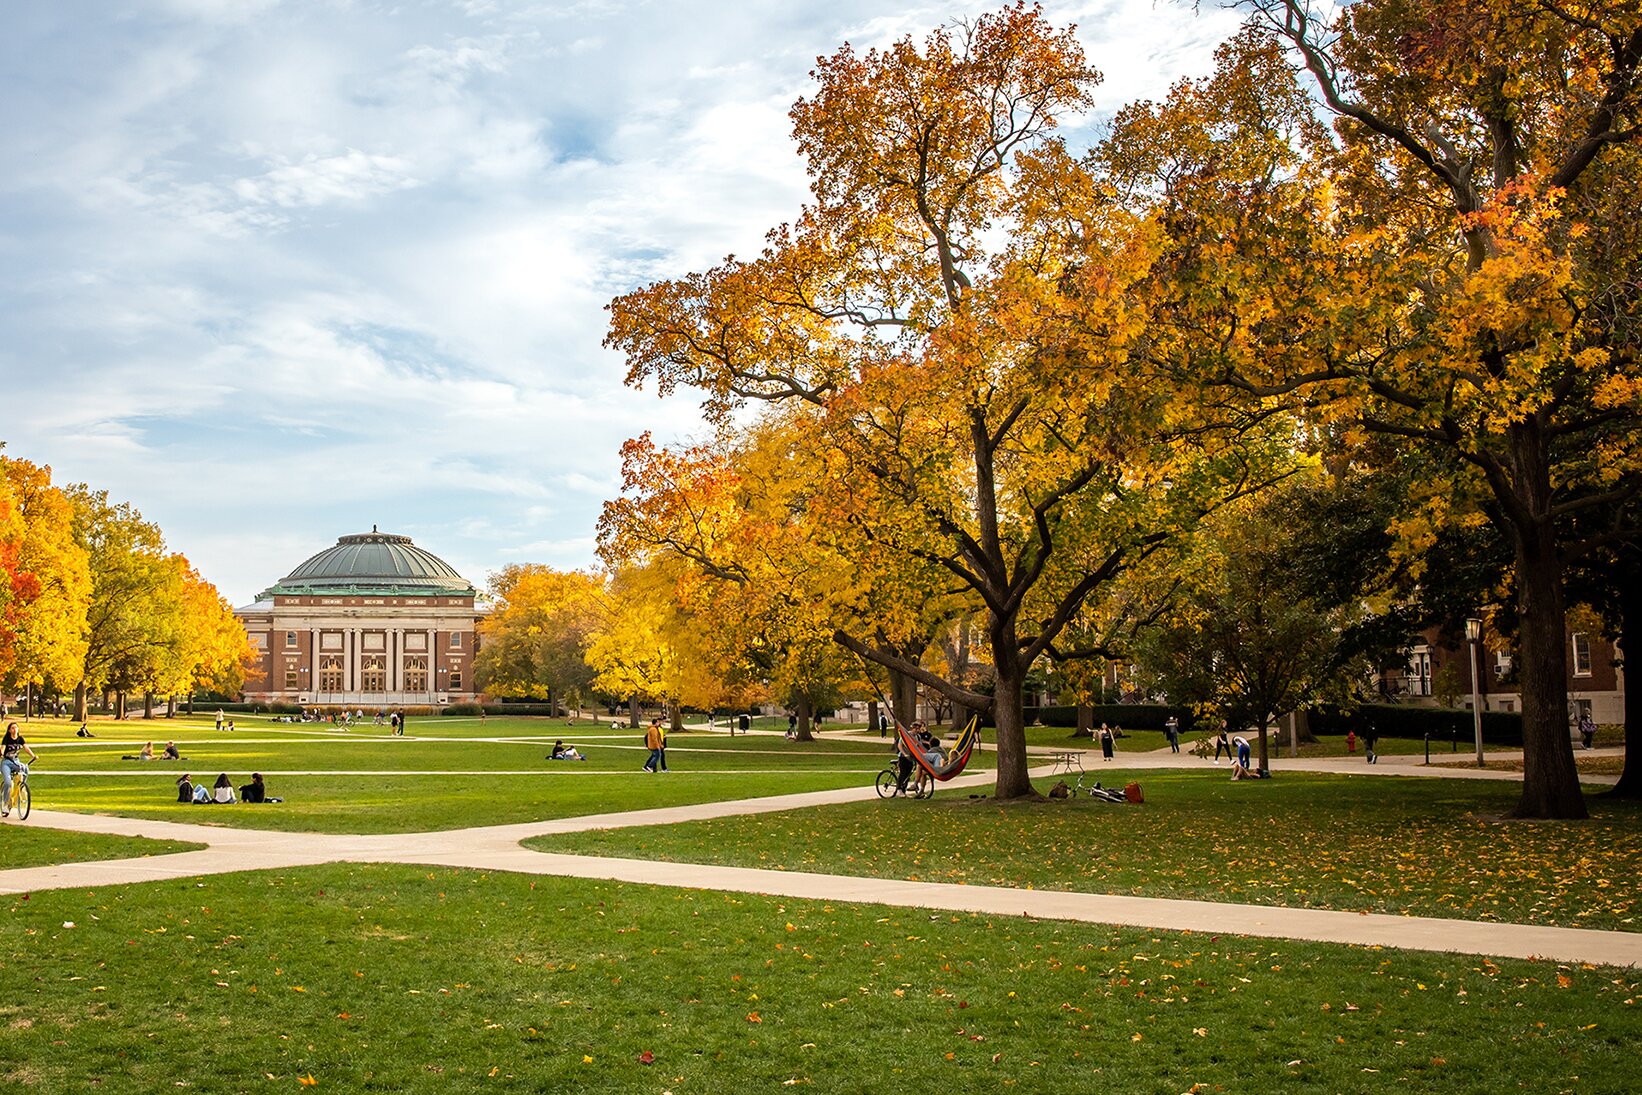 Scenic view of Main Quad with Foellinger Auditorium in distance and autumn leaves.